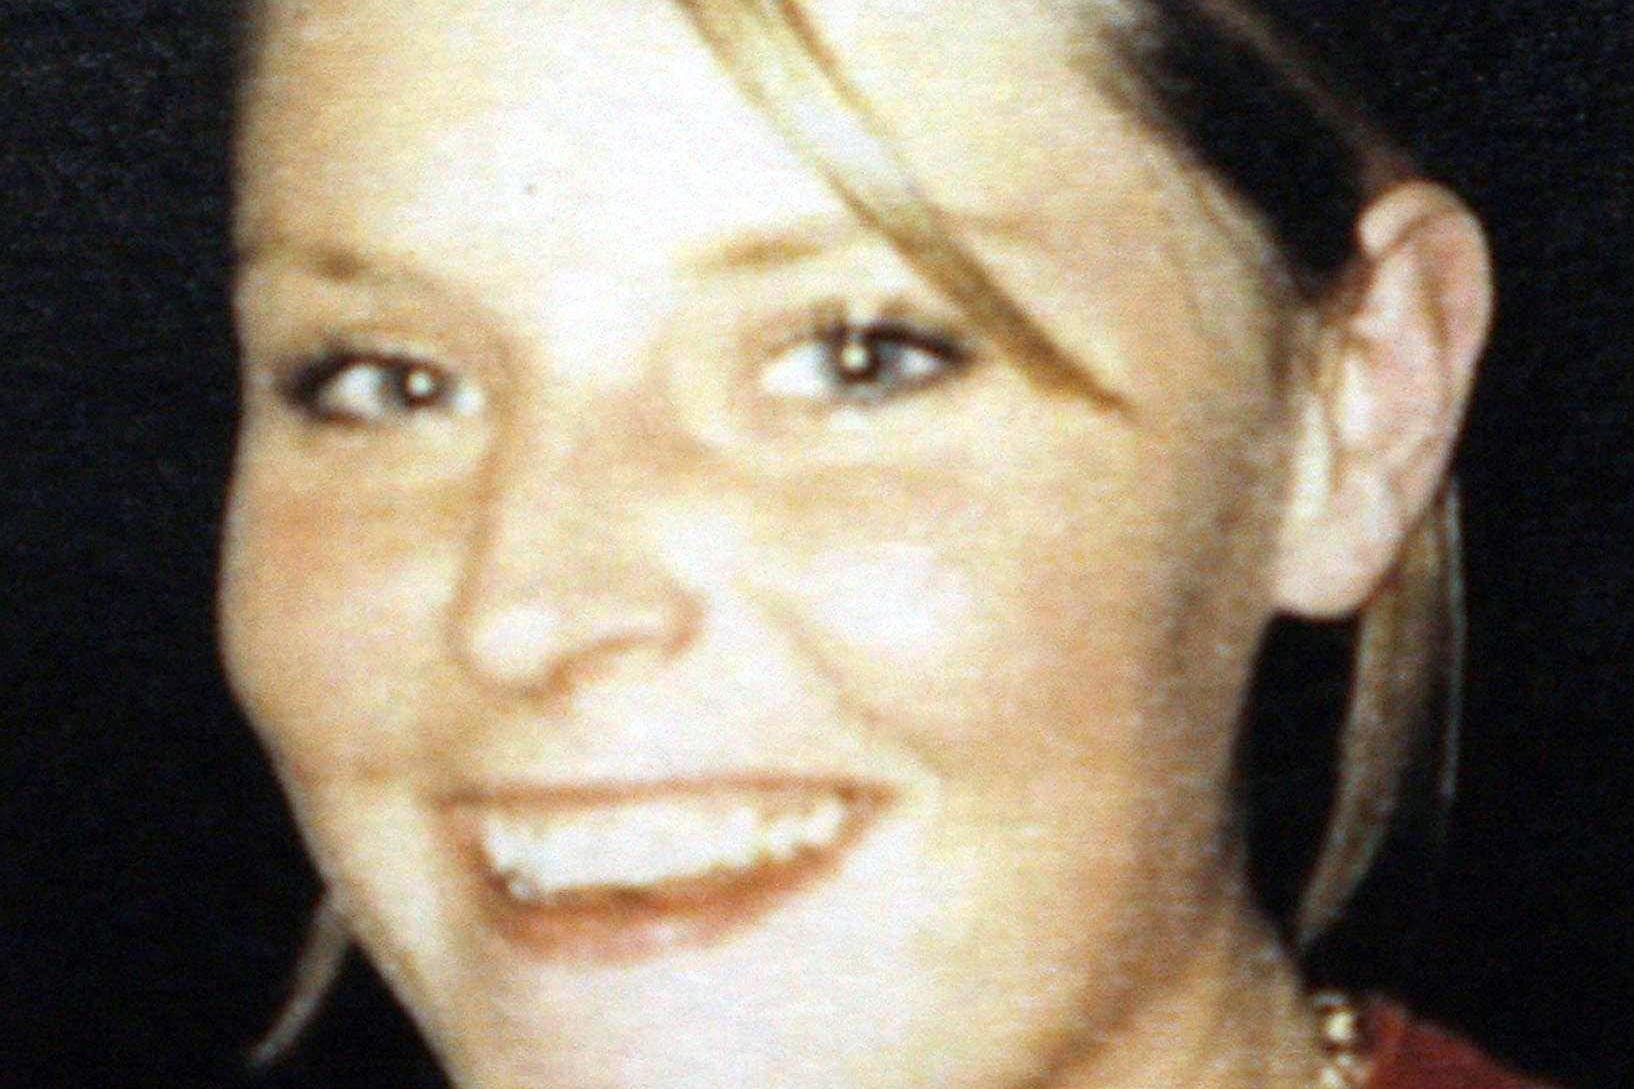 A £20,000 reward has been offered for information that leads to the arrest or conviction of those responsible for the disappearance of 25-year-old Lisa Dorrian from Bangor (PA)